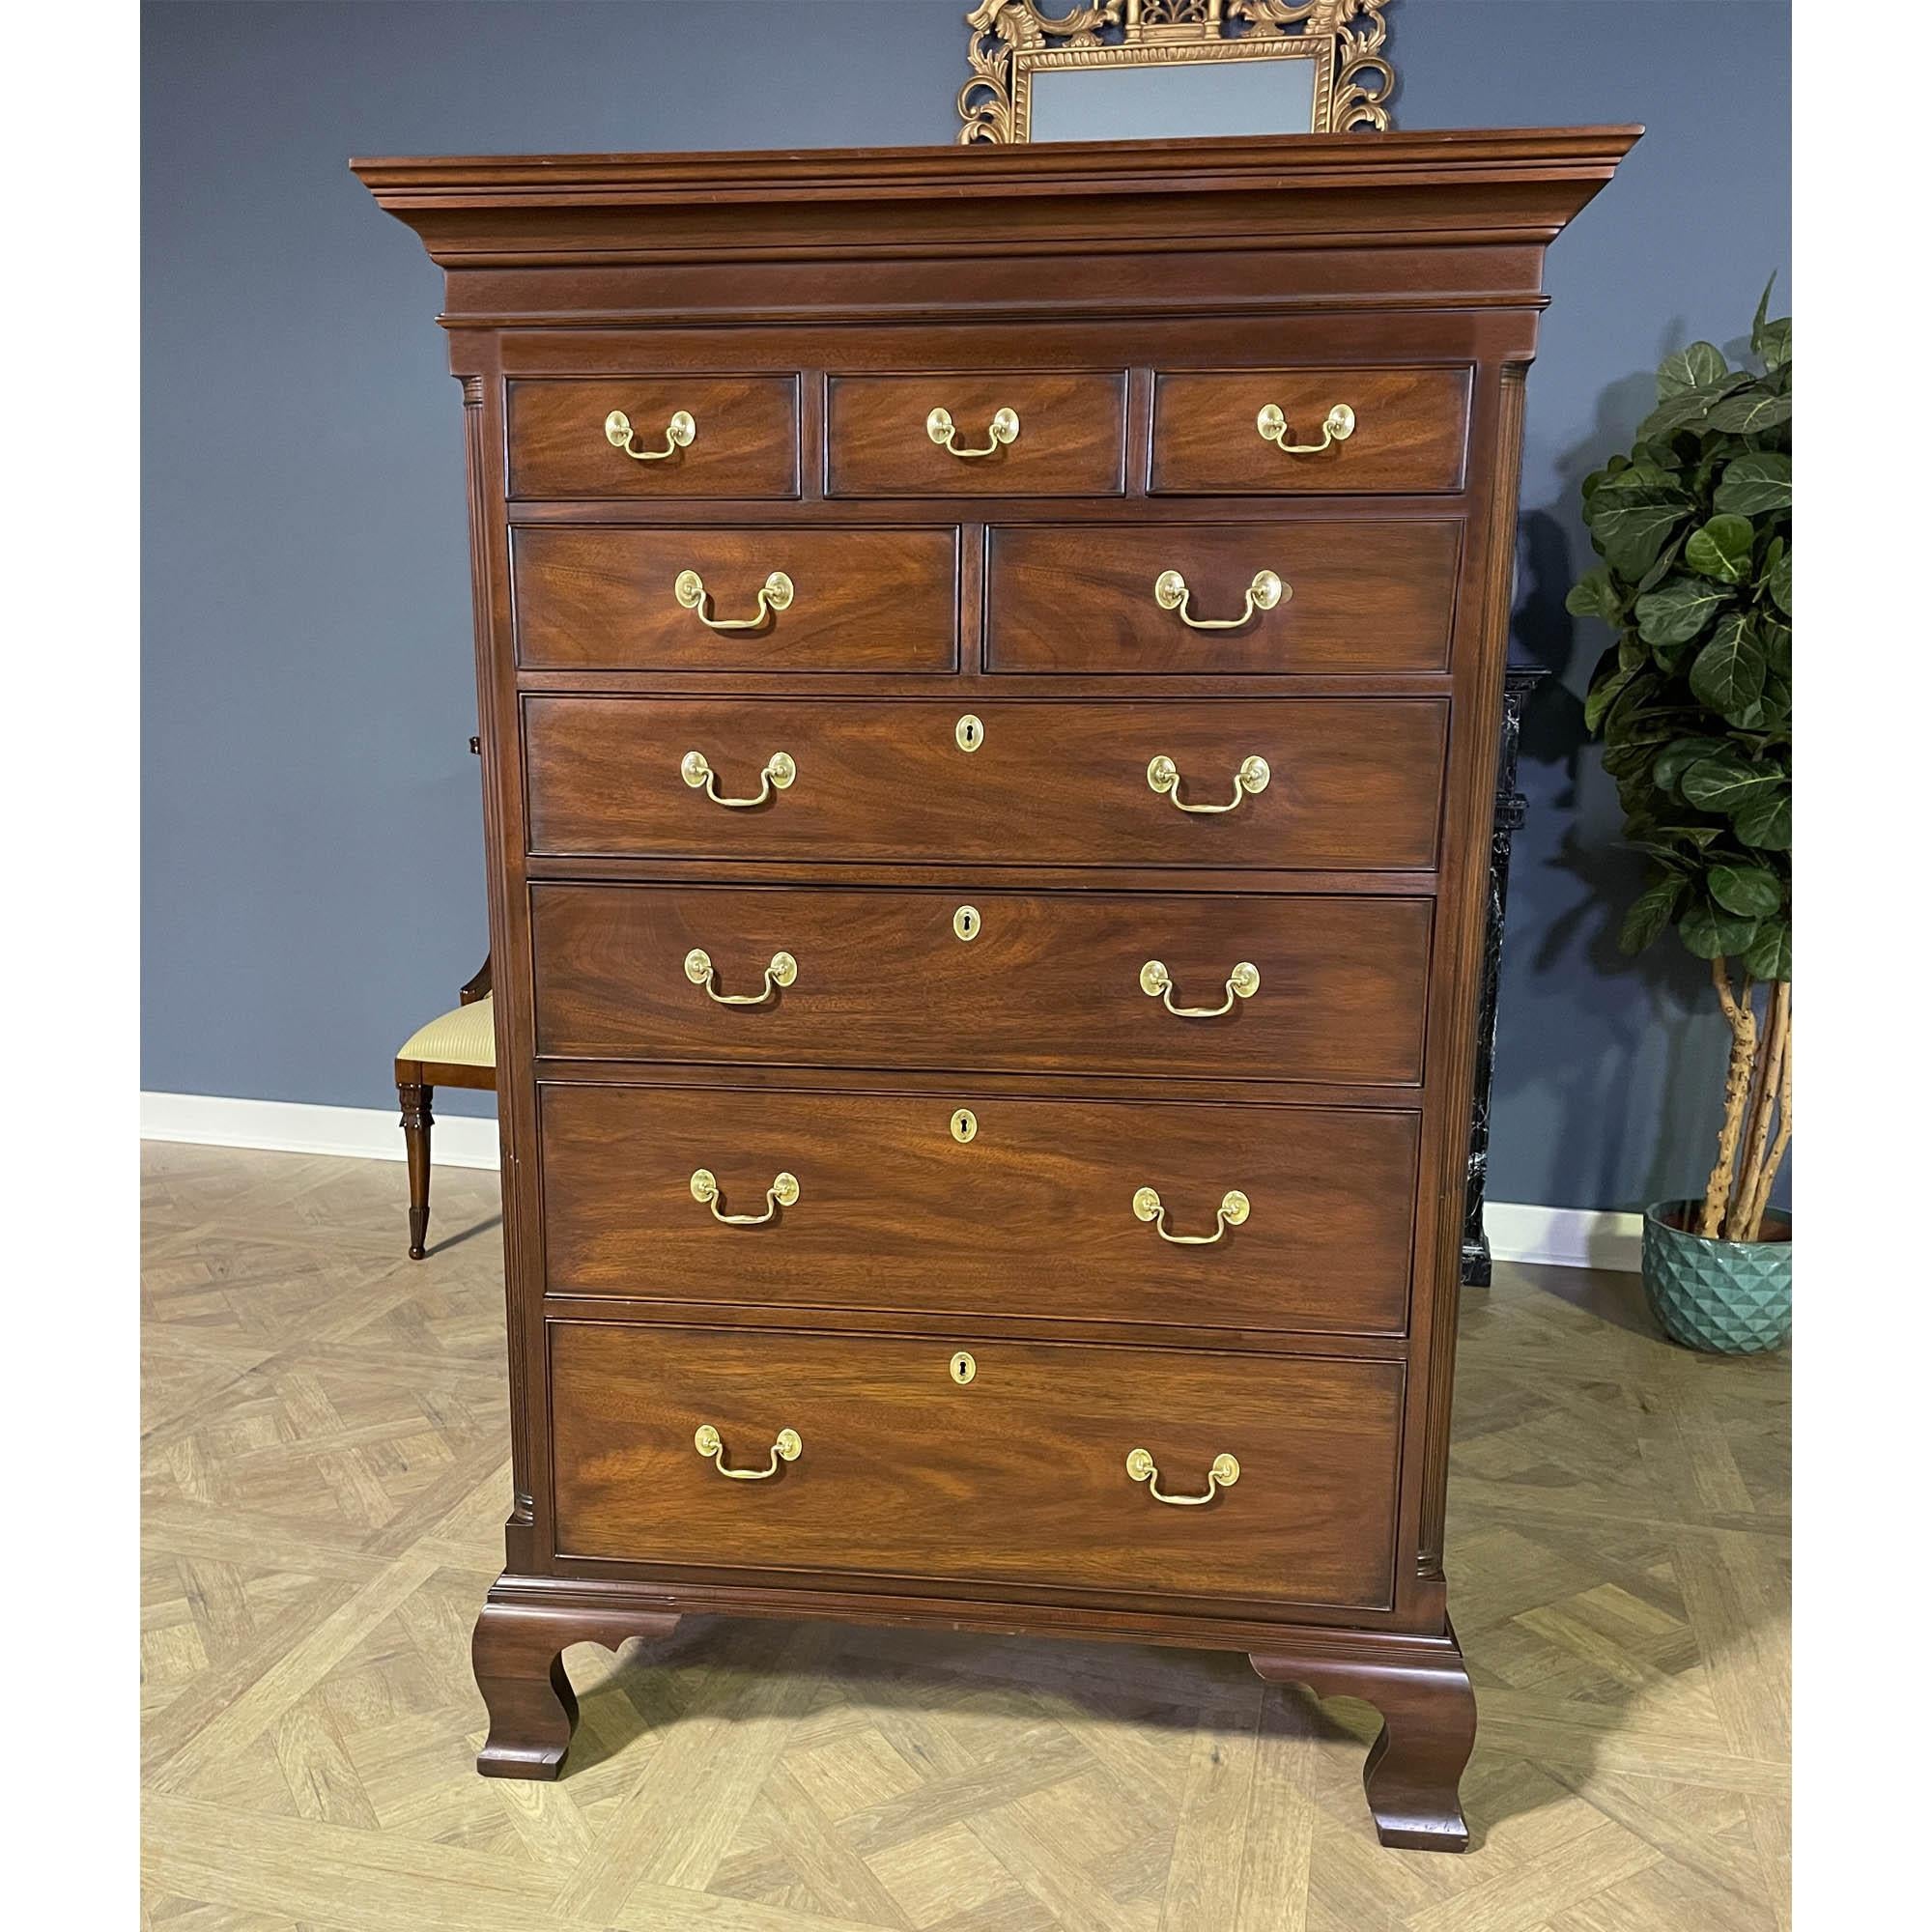 A Vintage Henkel Harris New Market Chest brought to you by Niagara Furniture. This chest is impressive in both it’s design and scale. Made of beautifully grained solid mahogany, the Vintage Henkel Harris New Market Chest features nine graduated